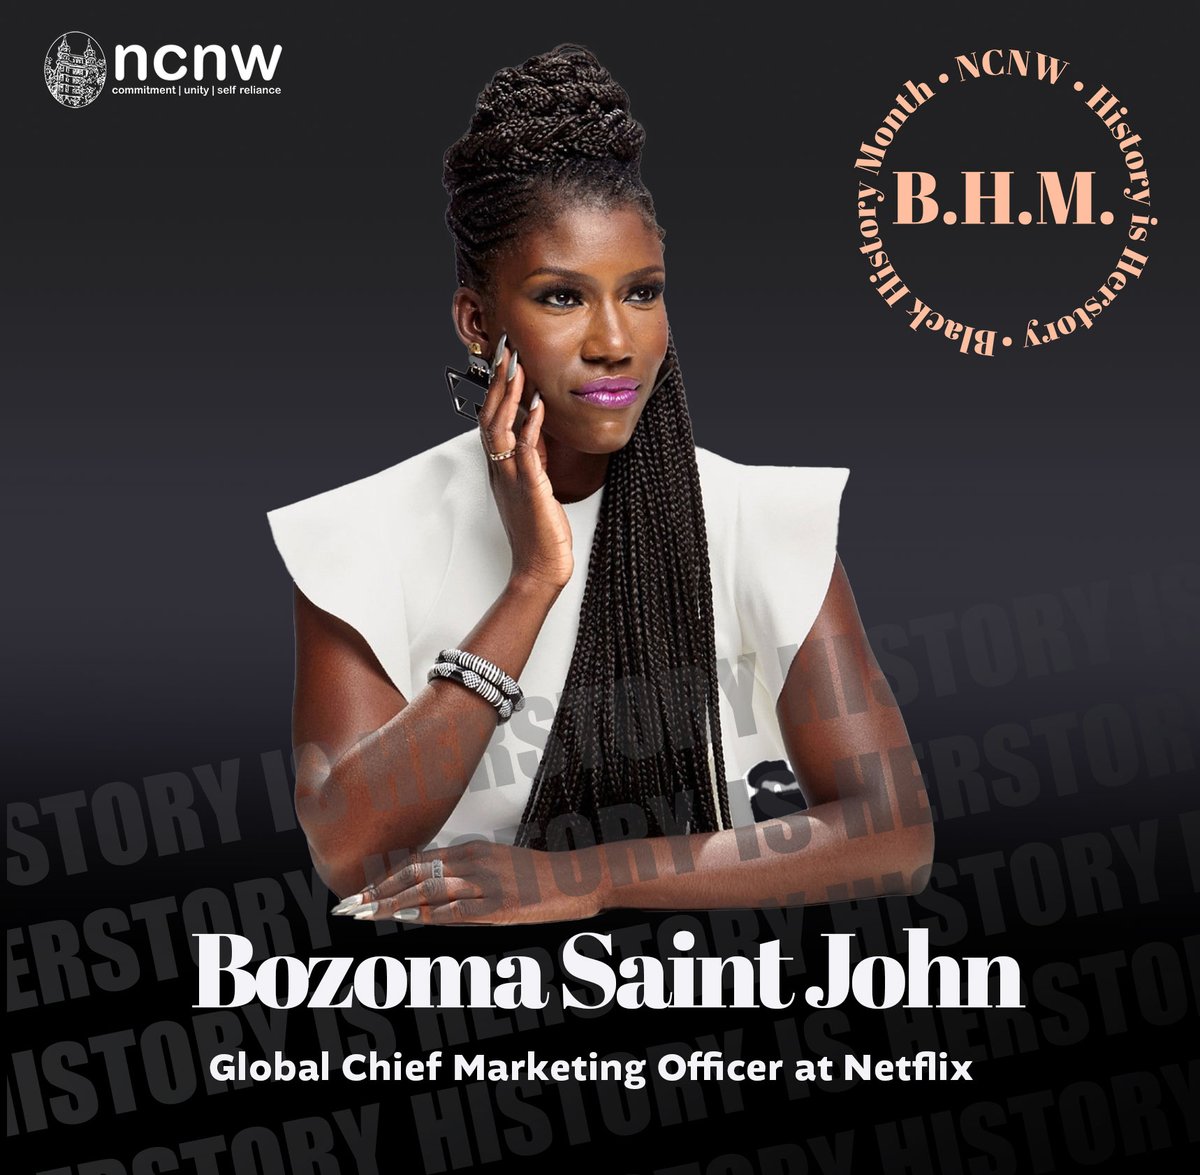 Bozoma Saint John is the Global Chief Marketing Officer at Netflix, the world’s leading streaming entertainment service. Her career has been marked by induction into the American Advertising Federation Hall of Achievement and many more! (Credit: BozomaSaintJohn.com) #BHM